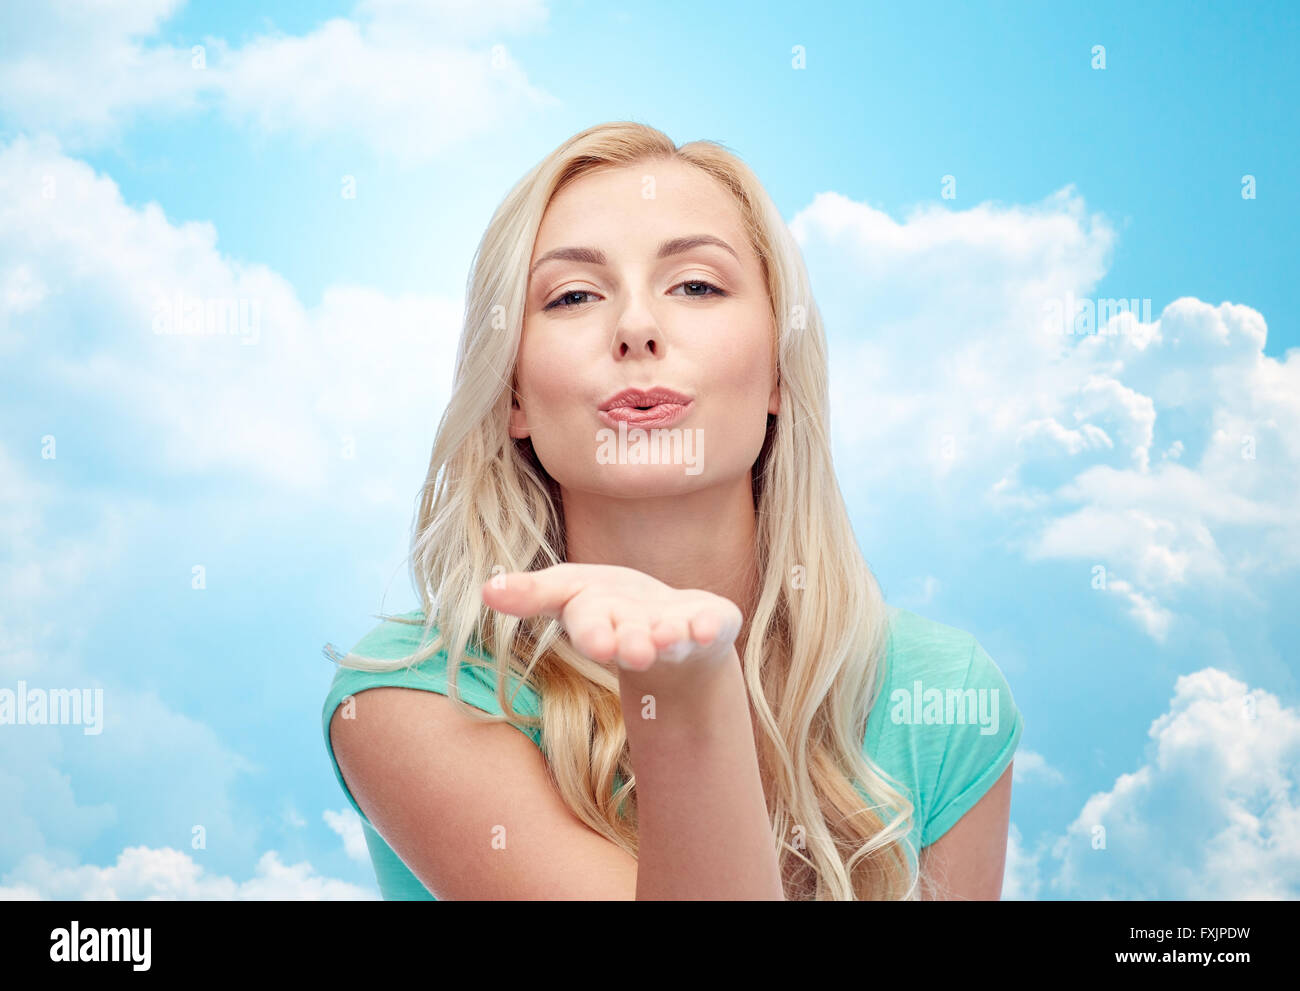 smiling young woman or teen girl sending blow kiss Stock Photo